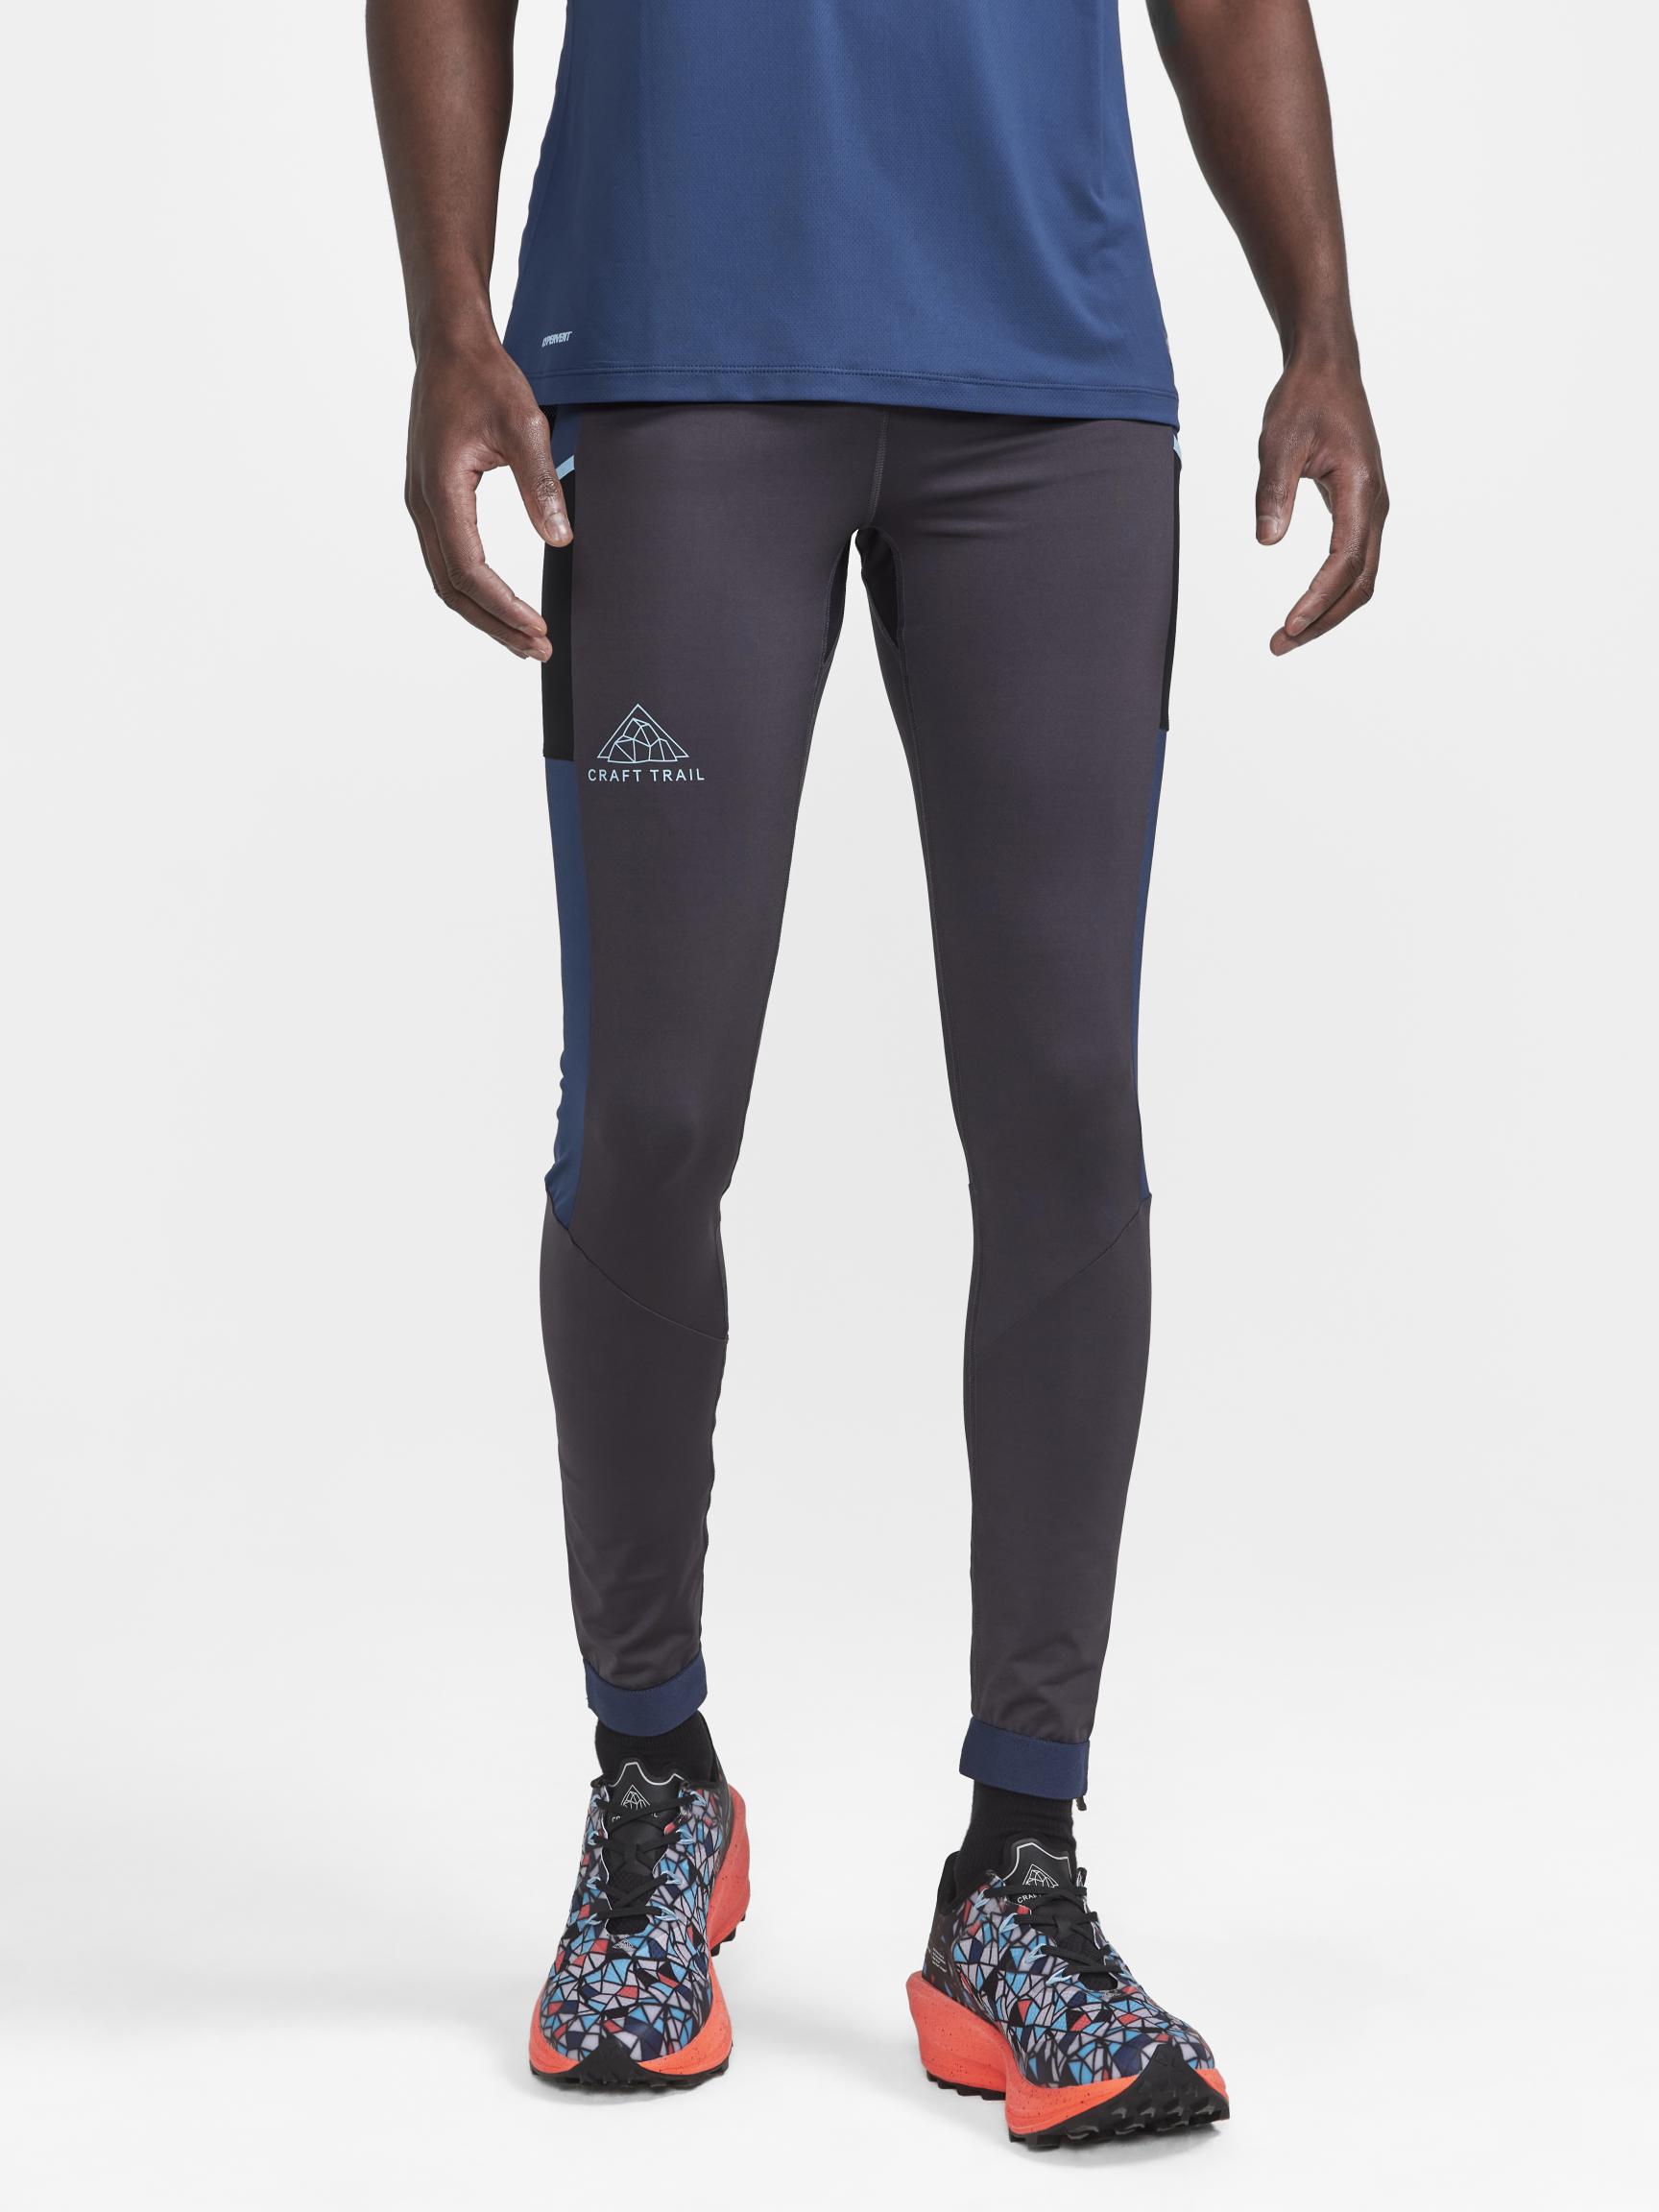 Men's Craft Pro Trail Tights, Free Shipping $99+